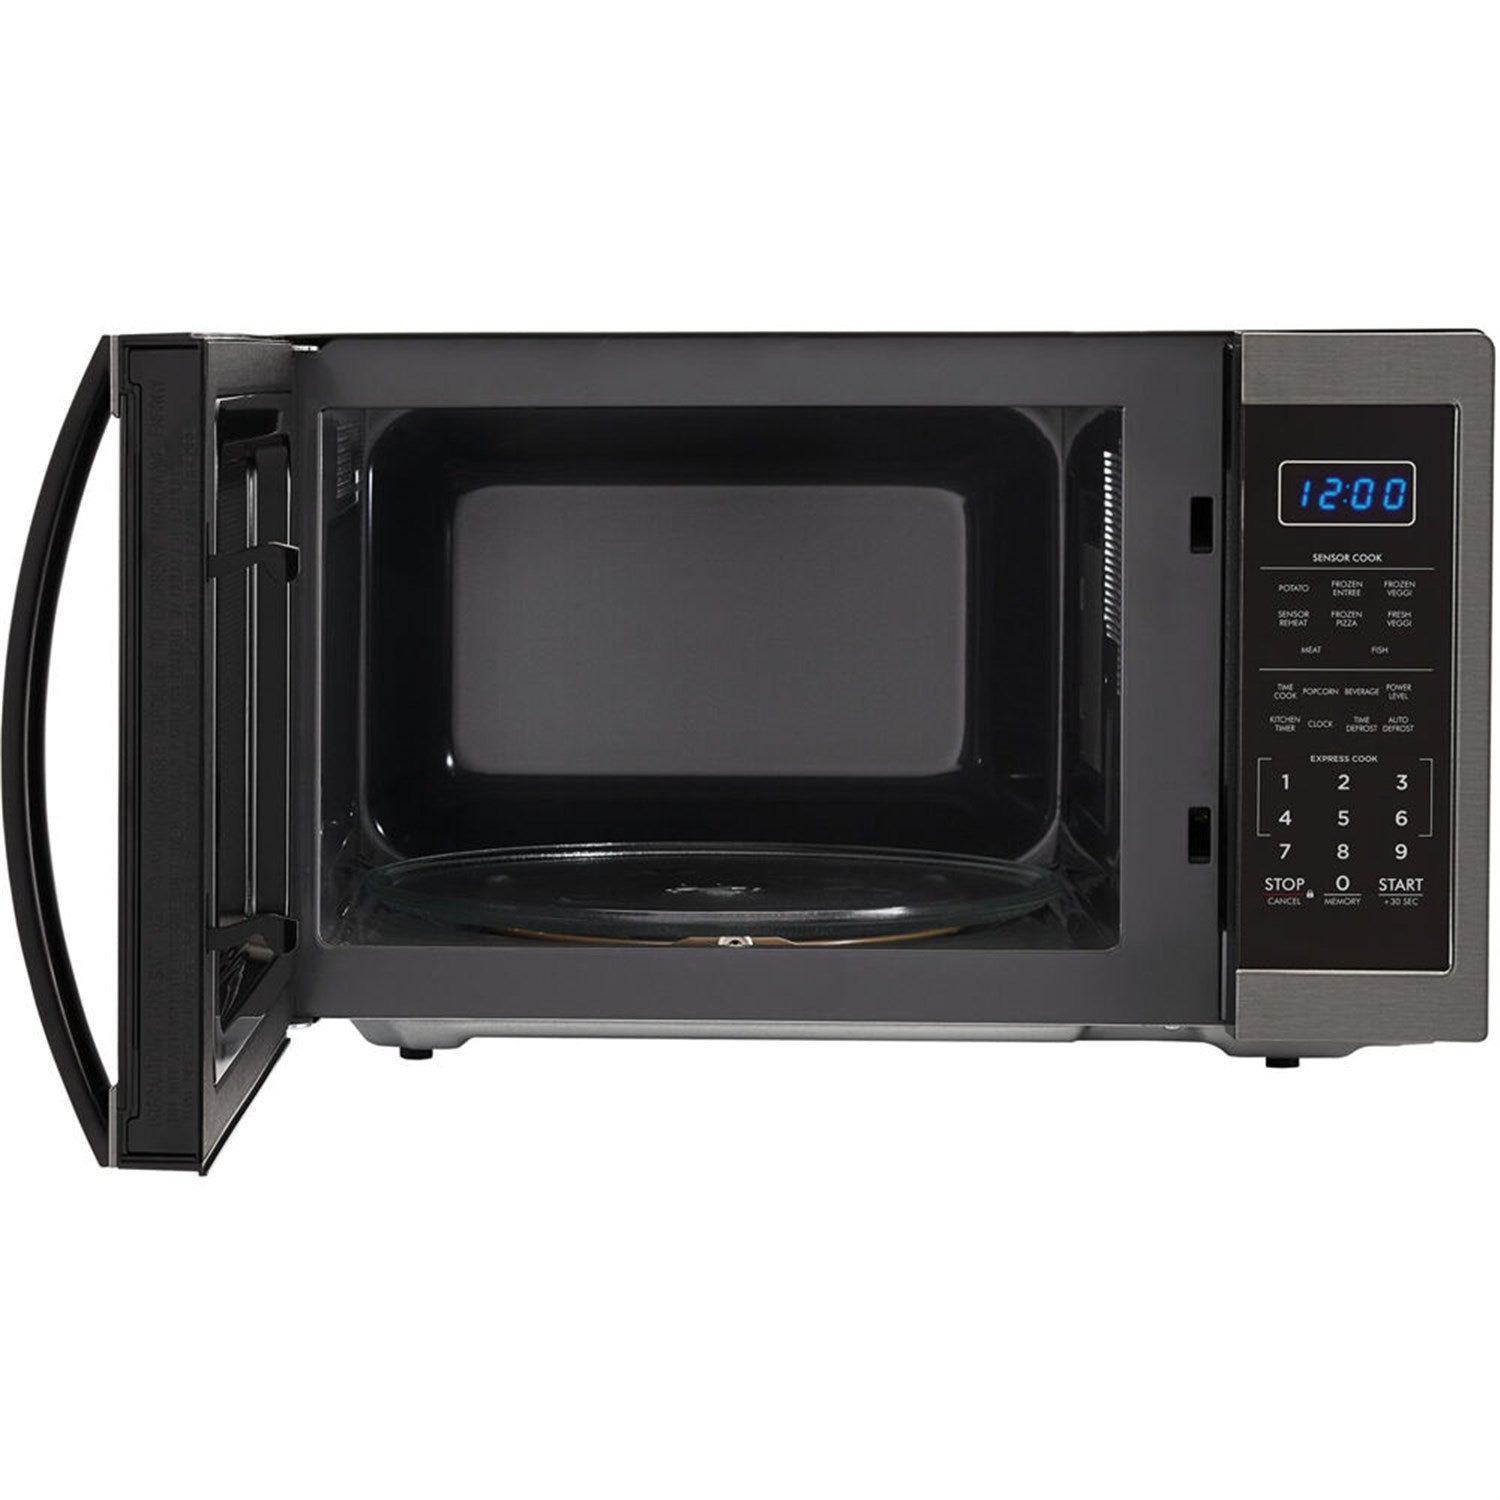 Sharp Carousel 20" 1.4 CU. Ft. 1100W Sharp Black Stainless Steel Countertop Microwave Oven